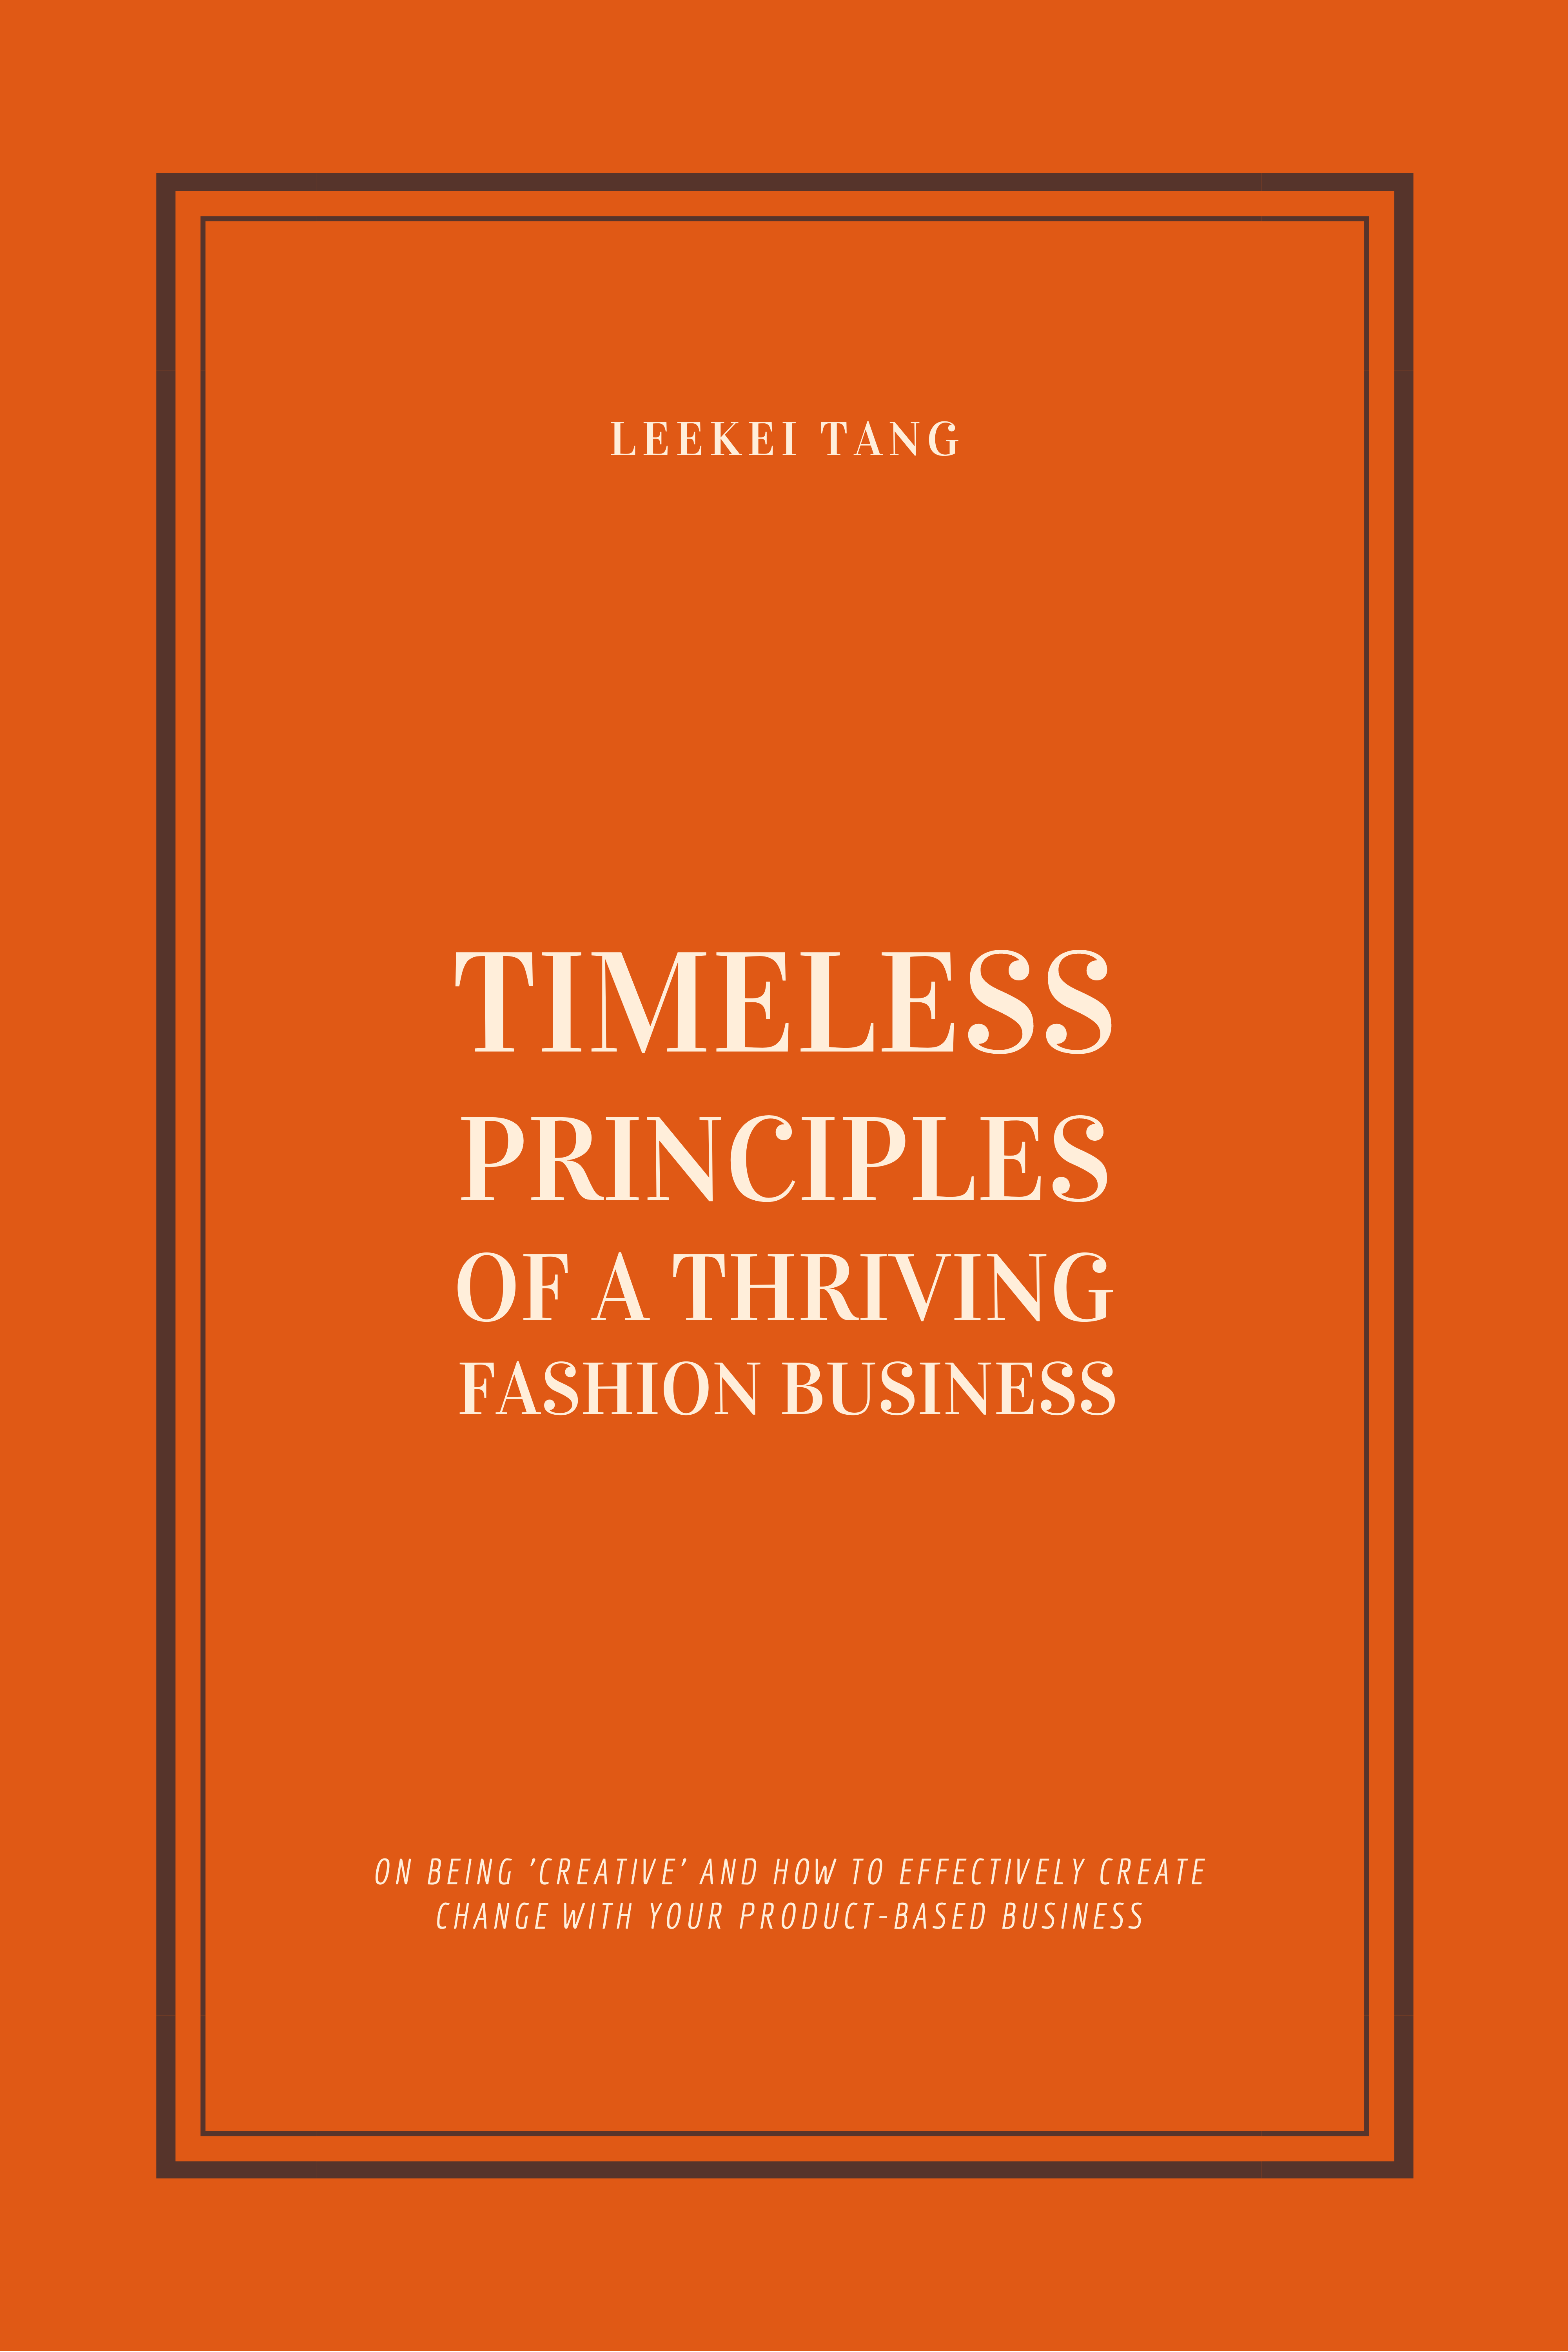 timeless principles of a thriving fashion business